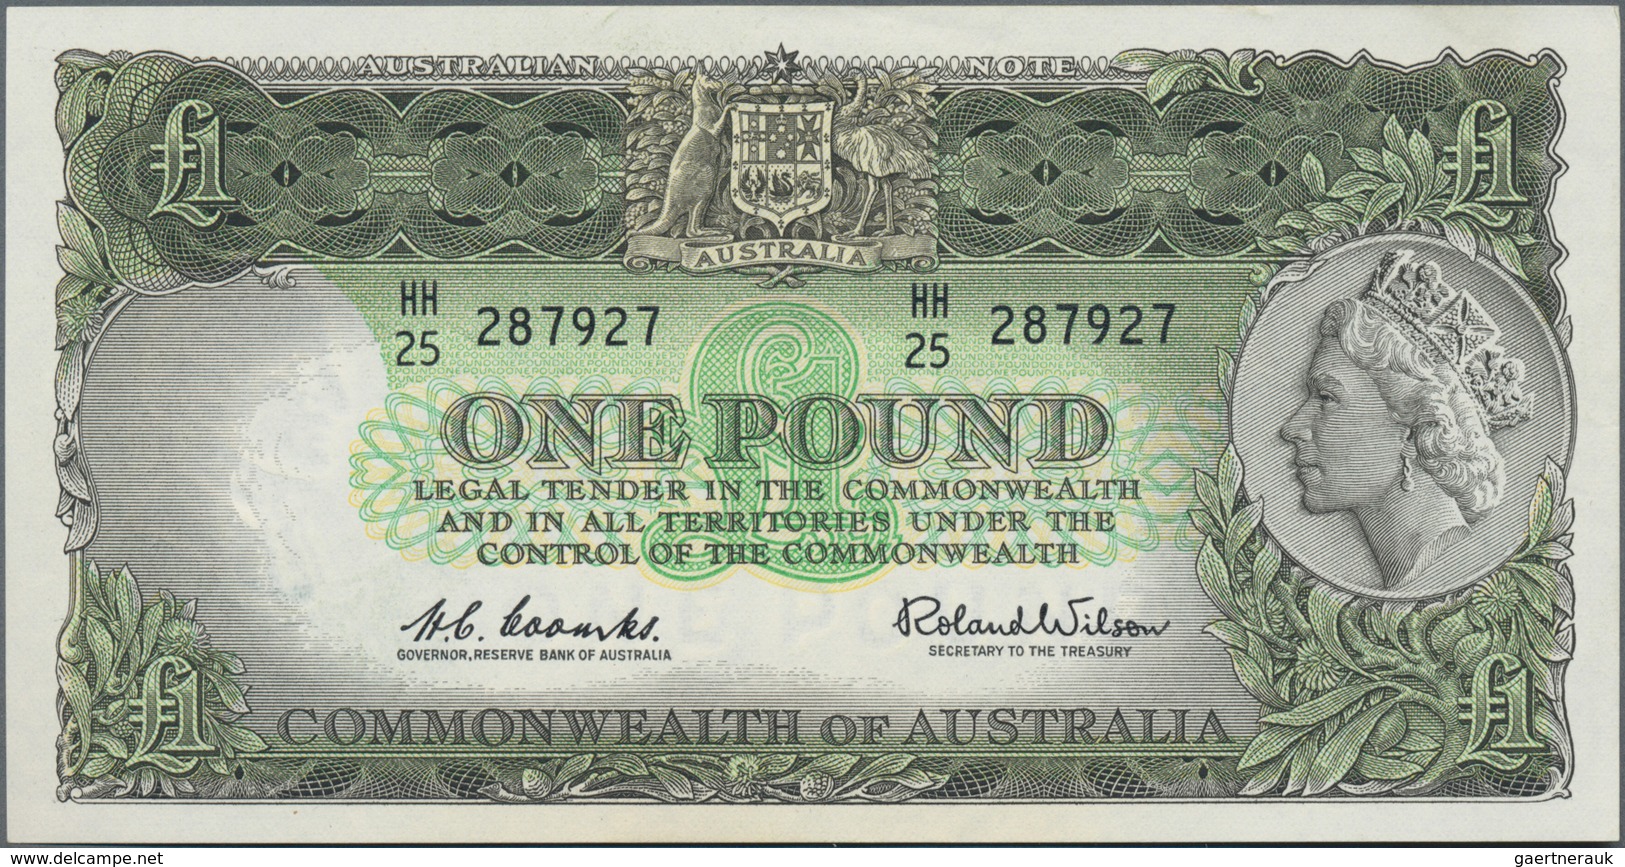 Australia / Australien: Very nice set with 4 banknotes comprising 1 Pound ND(1953-60) Commonwealth o